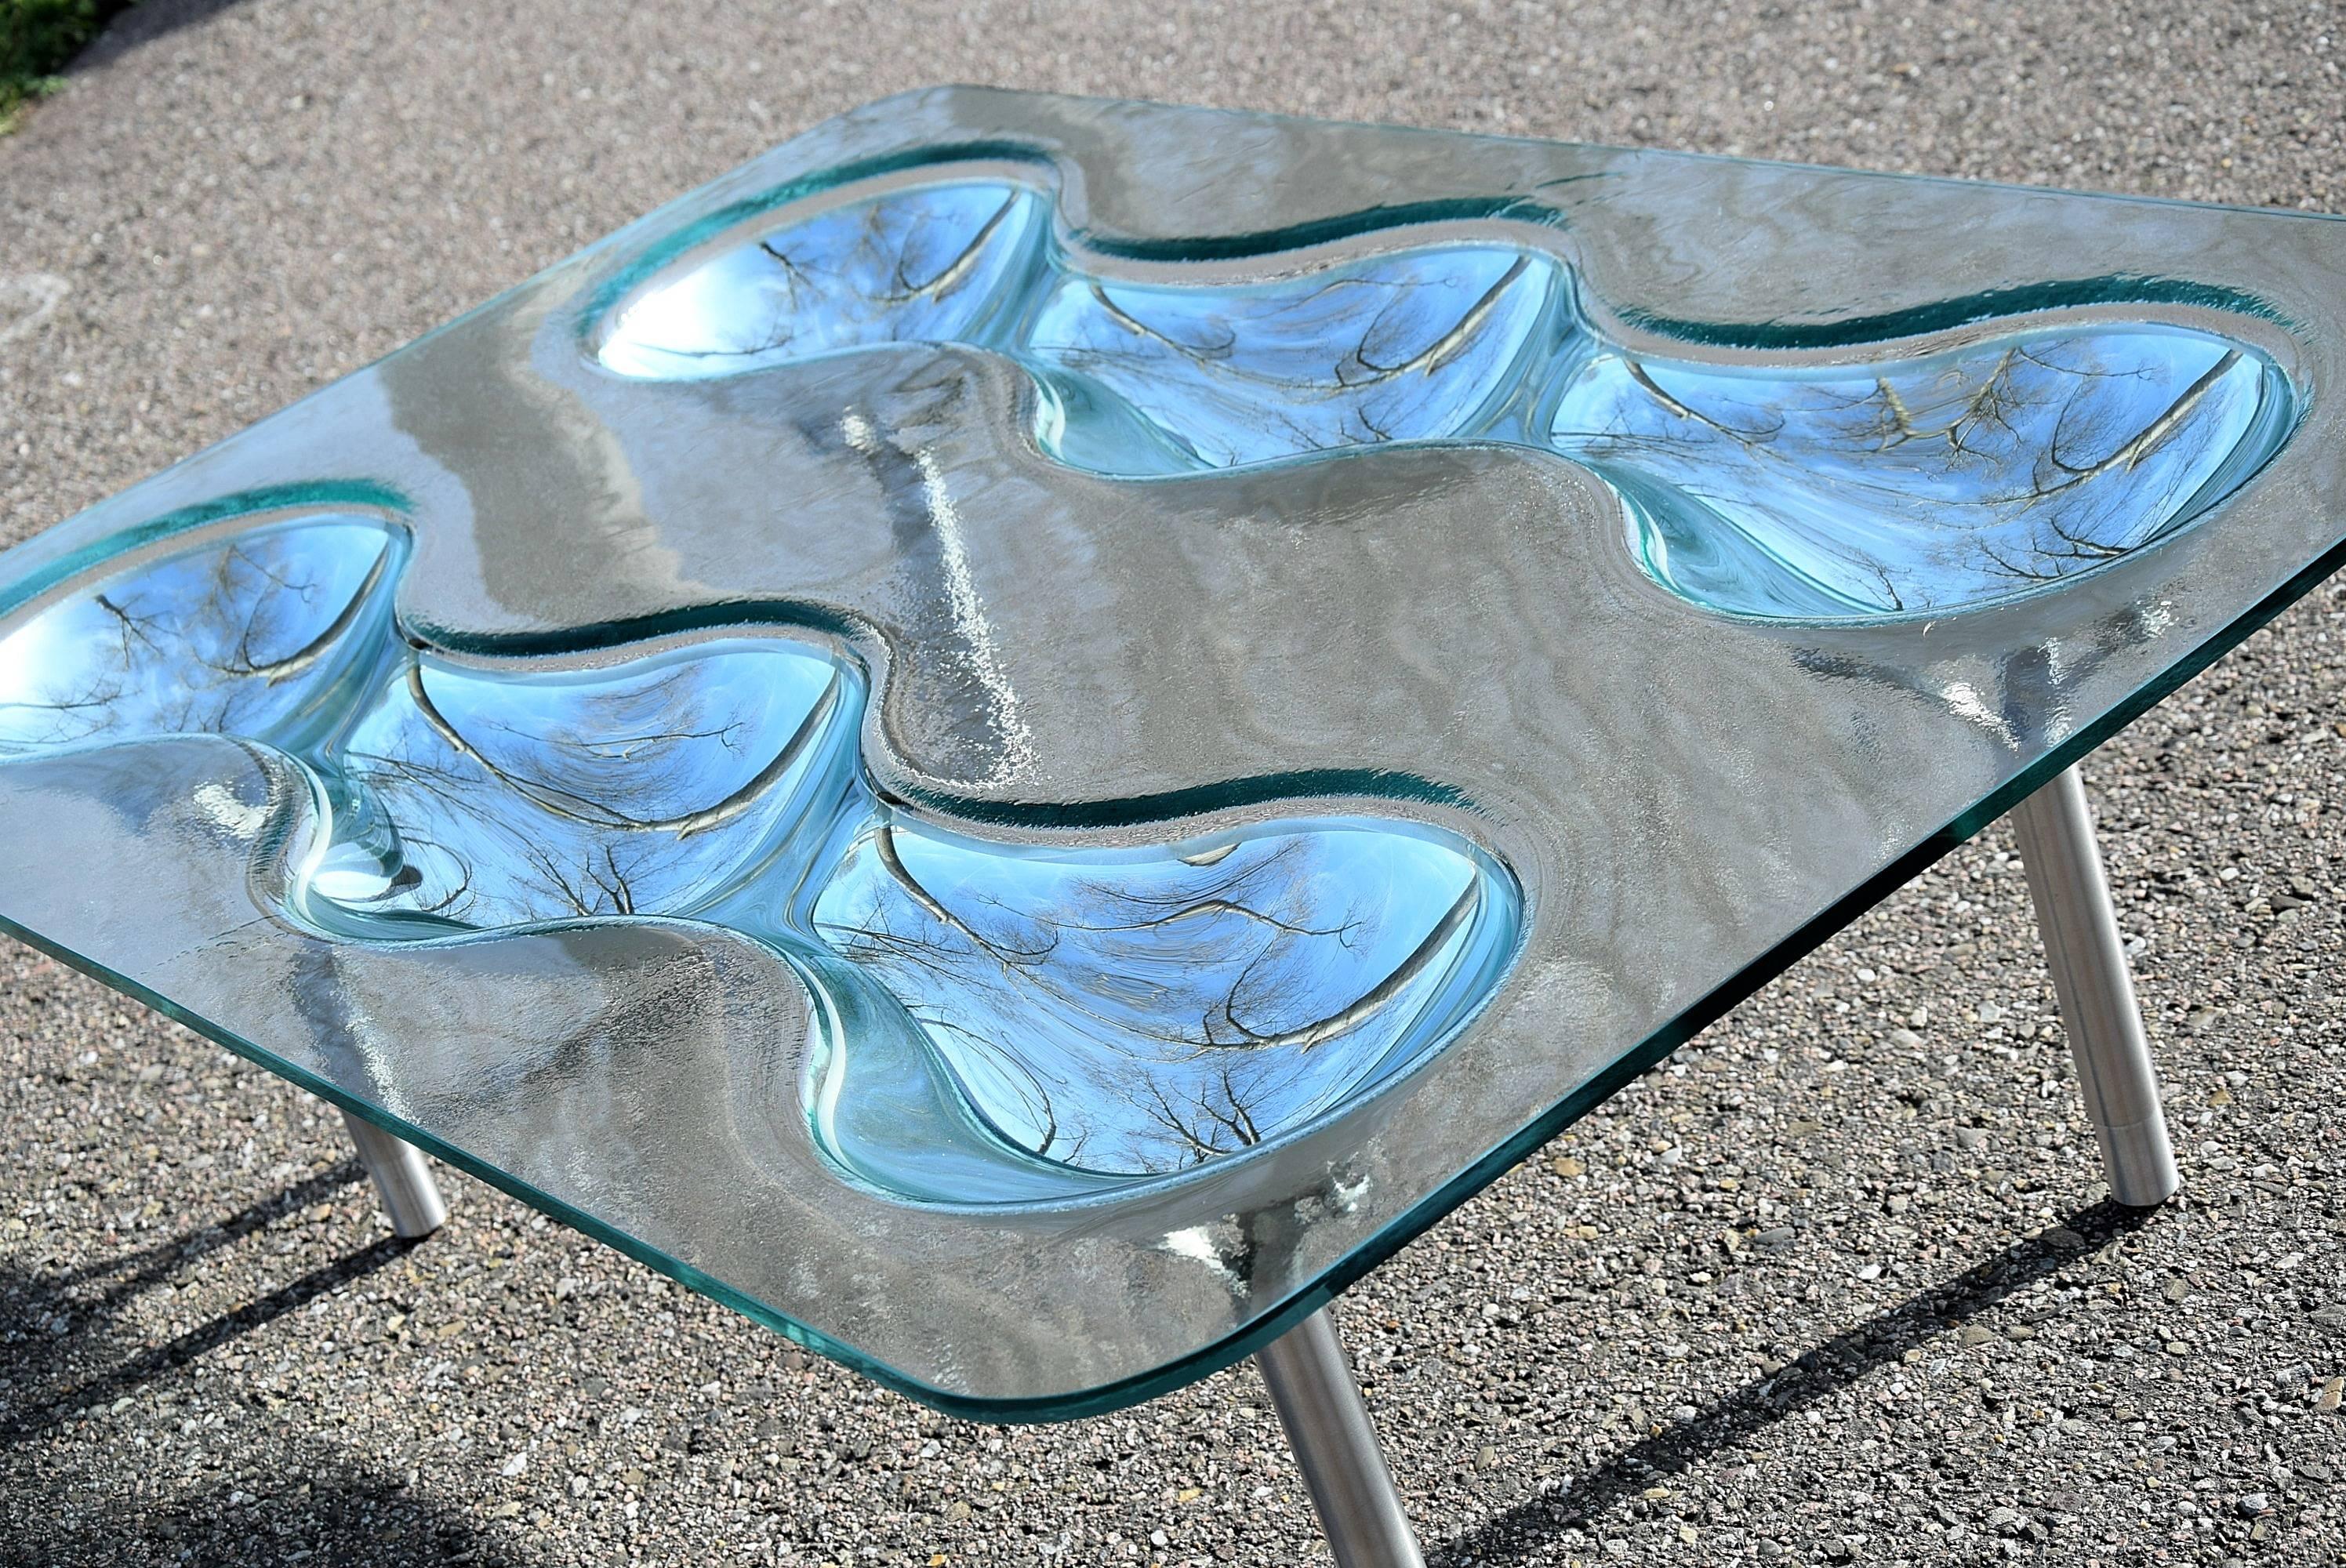 Coffee table Konx by Rona Arad
Konx is a unique coffee table in 10 mm-thick fused glass with hollowed-out back-silvered parts. Features include intriguing visual quality and adjustable feet in glazed stainless steel produced in the early 1990s by